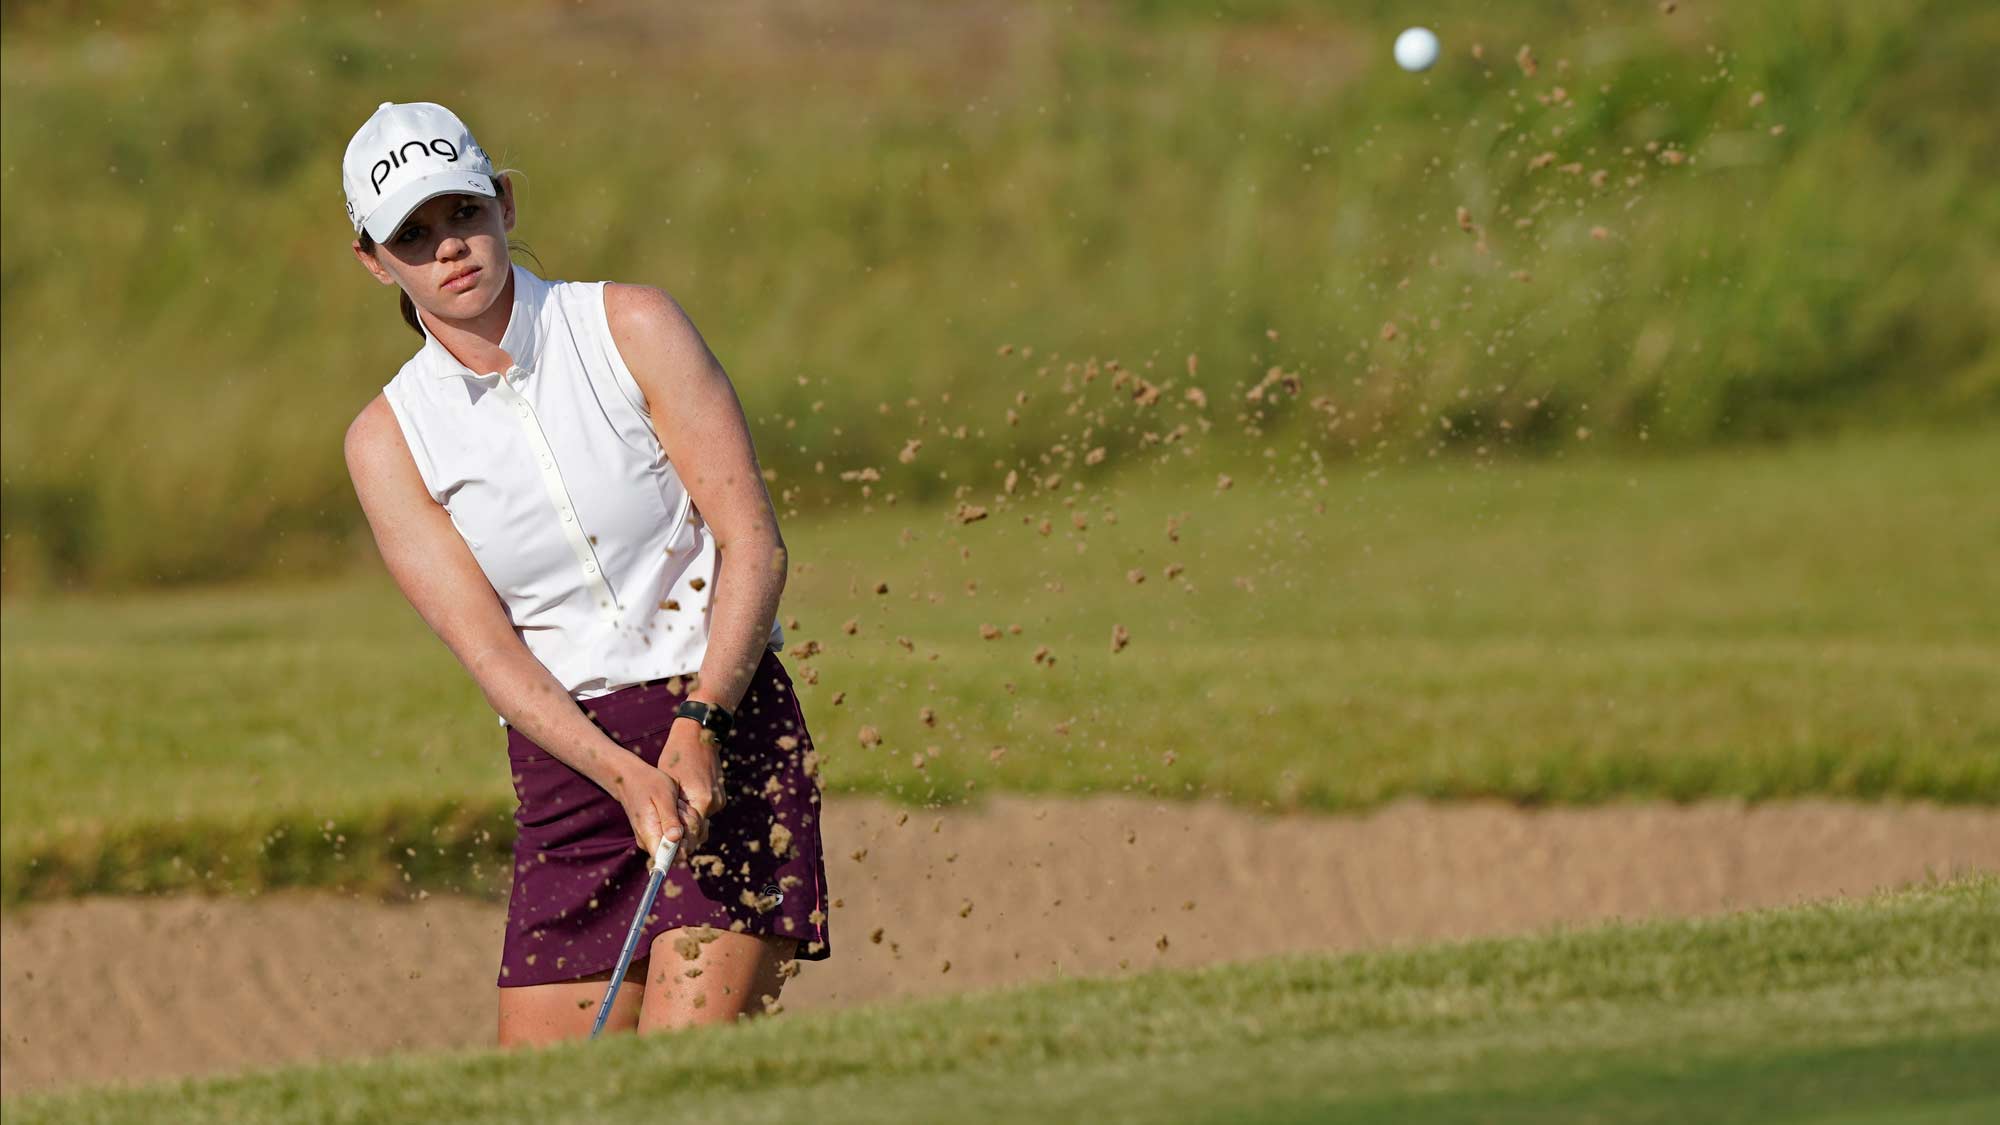 Sarah Schmelzel at the fourth round of the VOA Classic